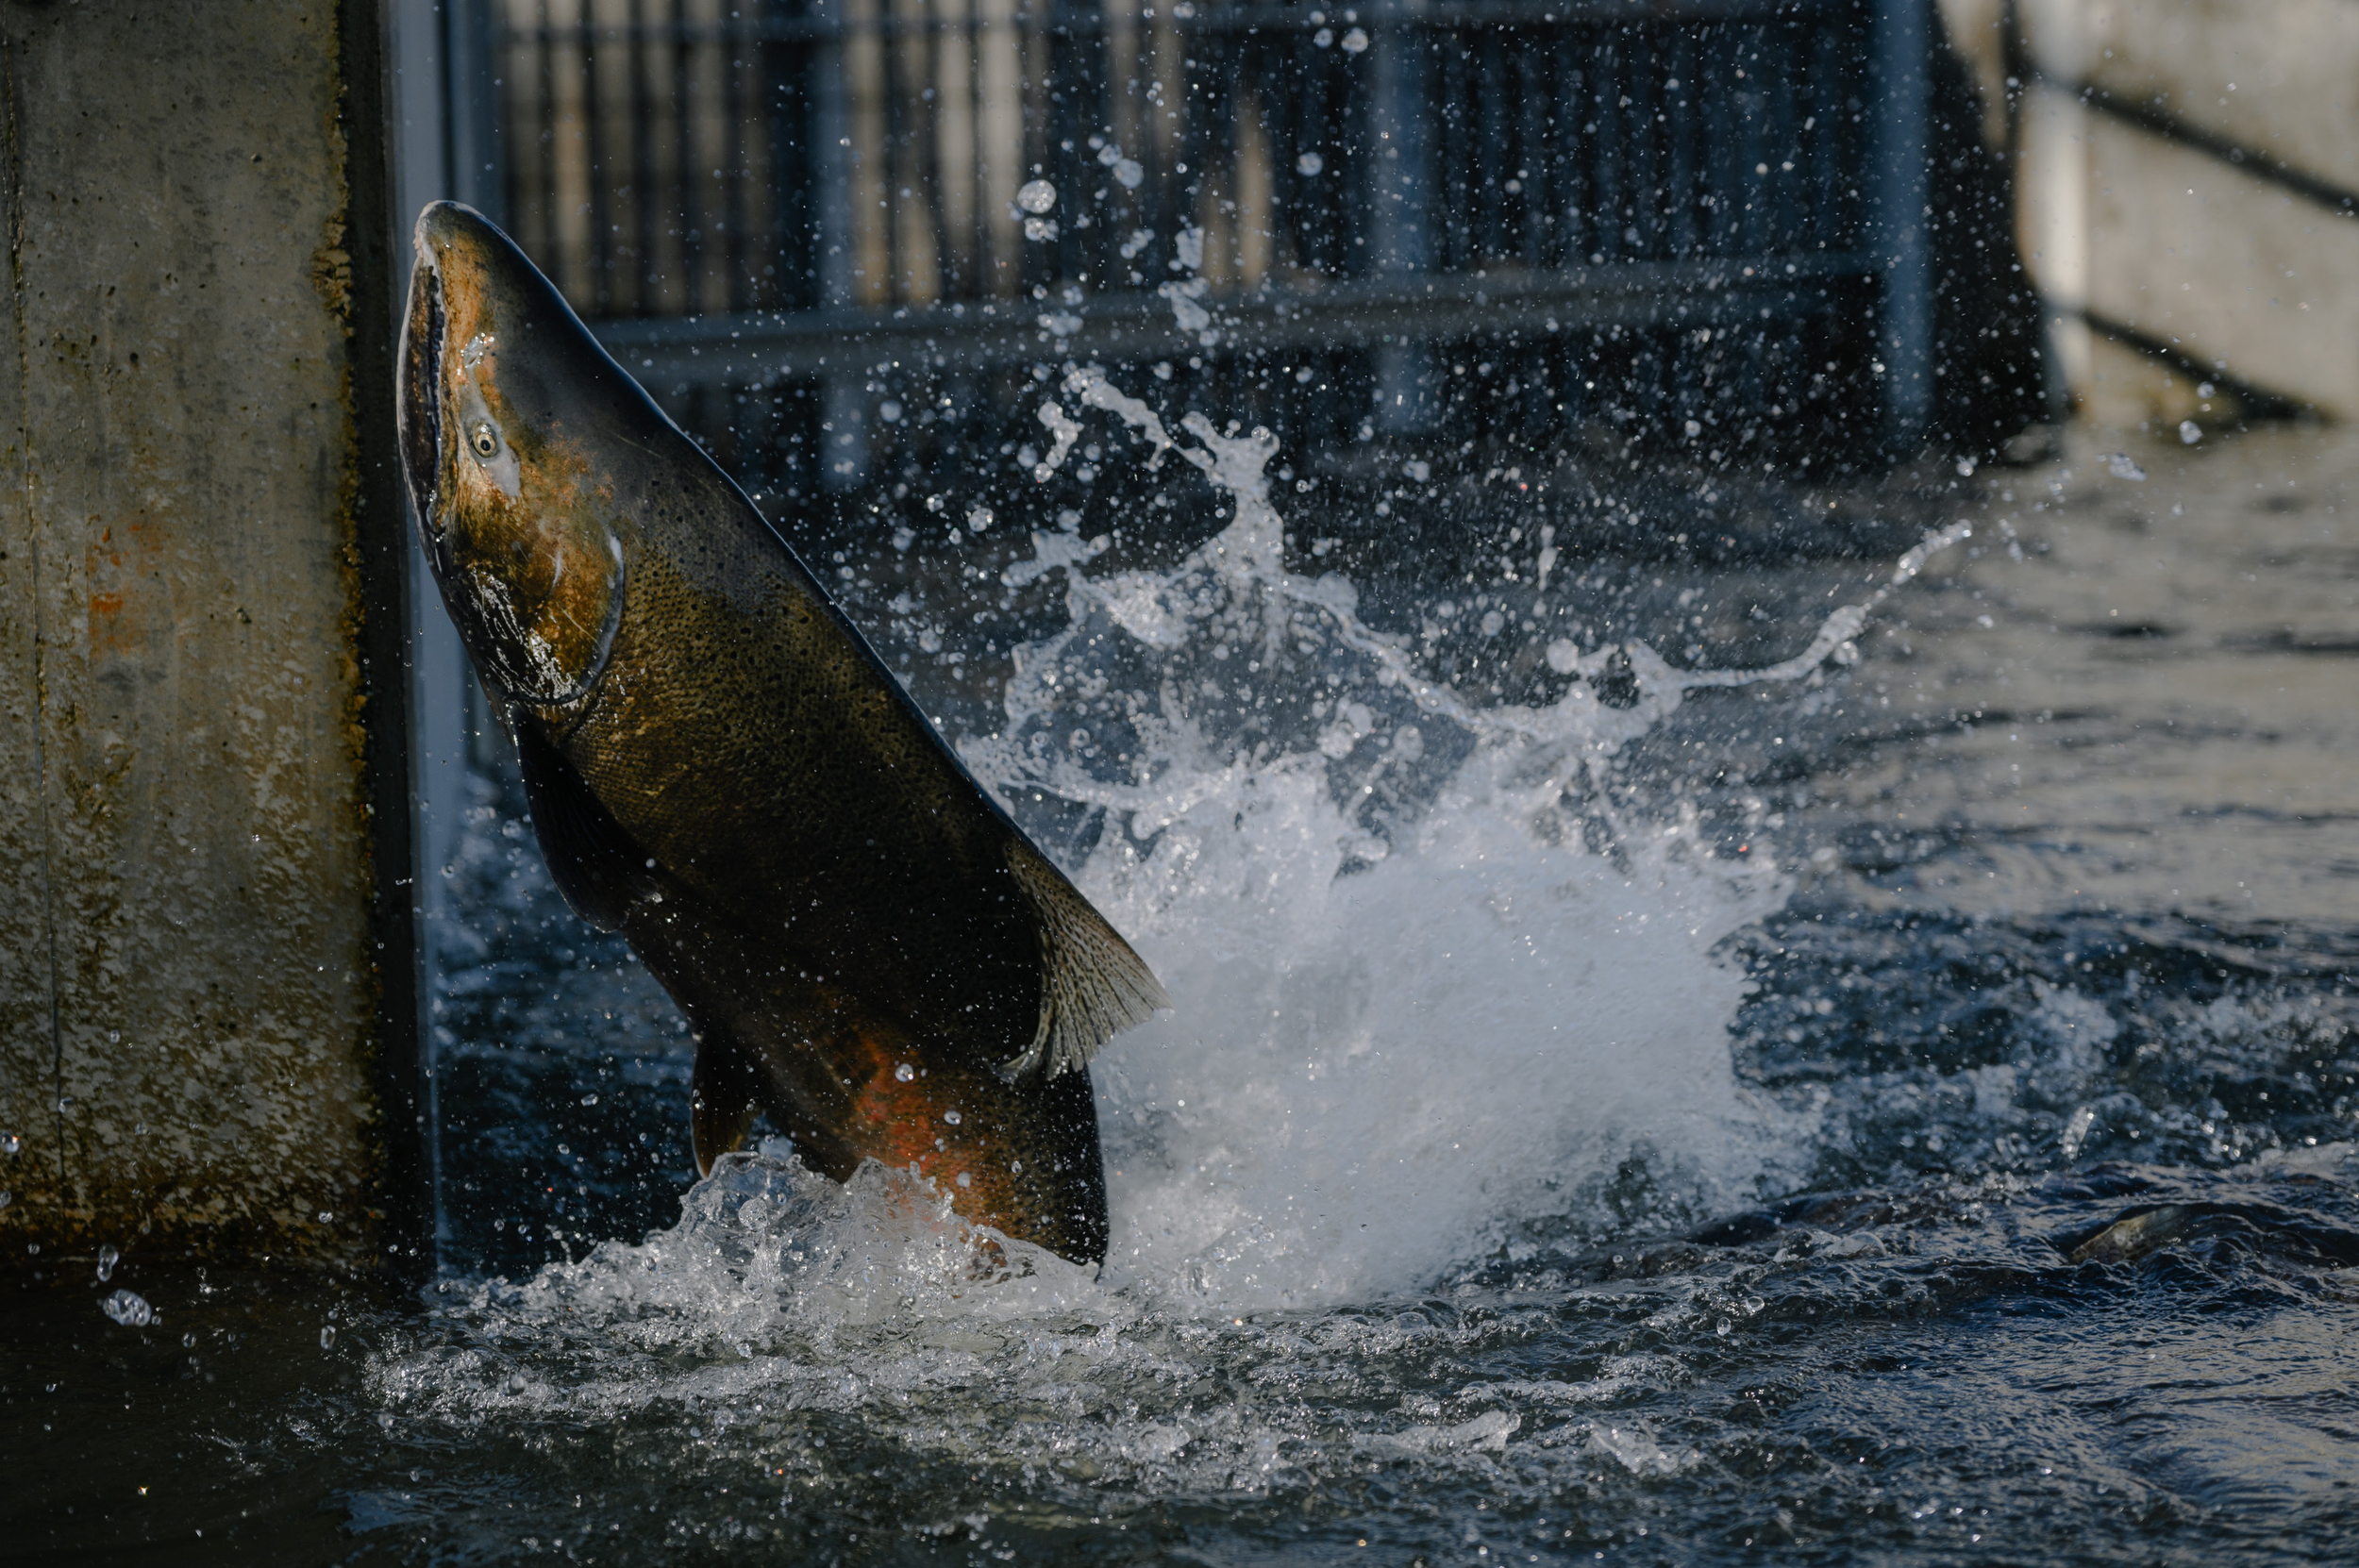 A large fish jumps against a section of concrete splashing water.